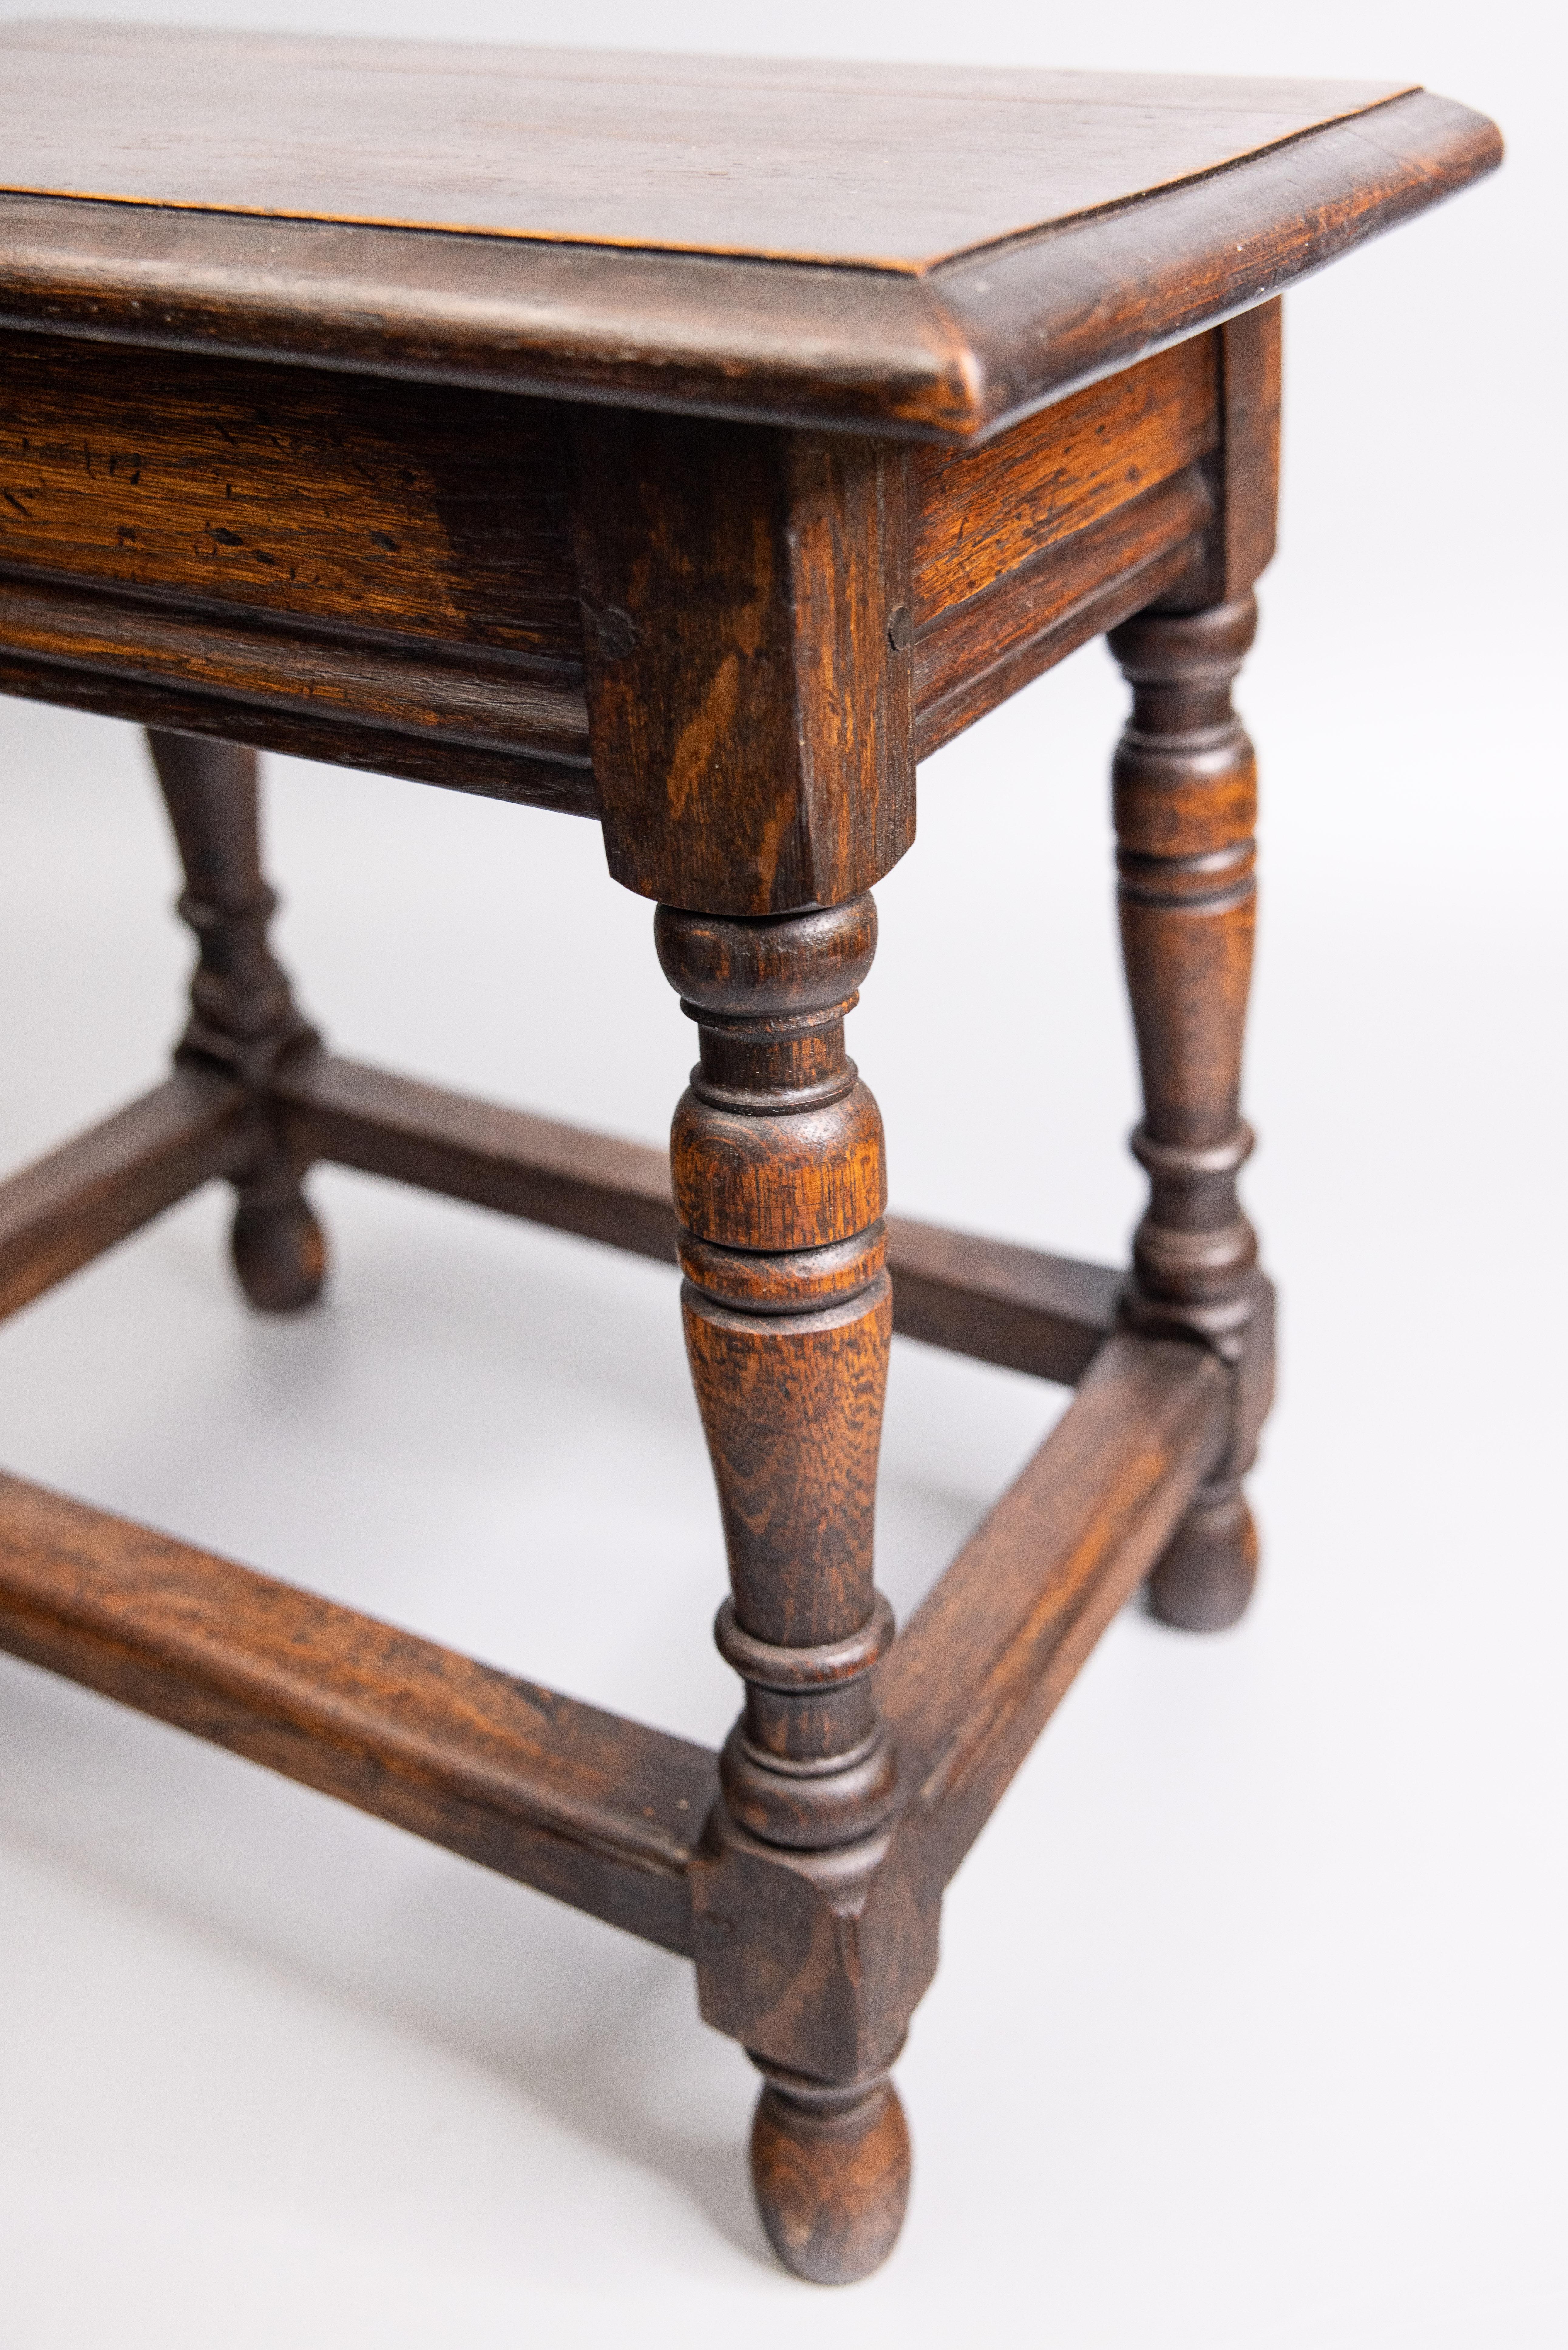 19th Century English Oak Pegged Joint Stool Side Table For Sale 4